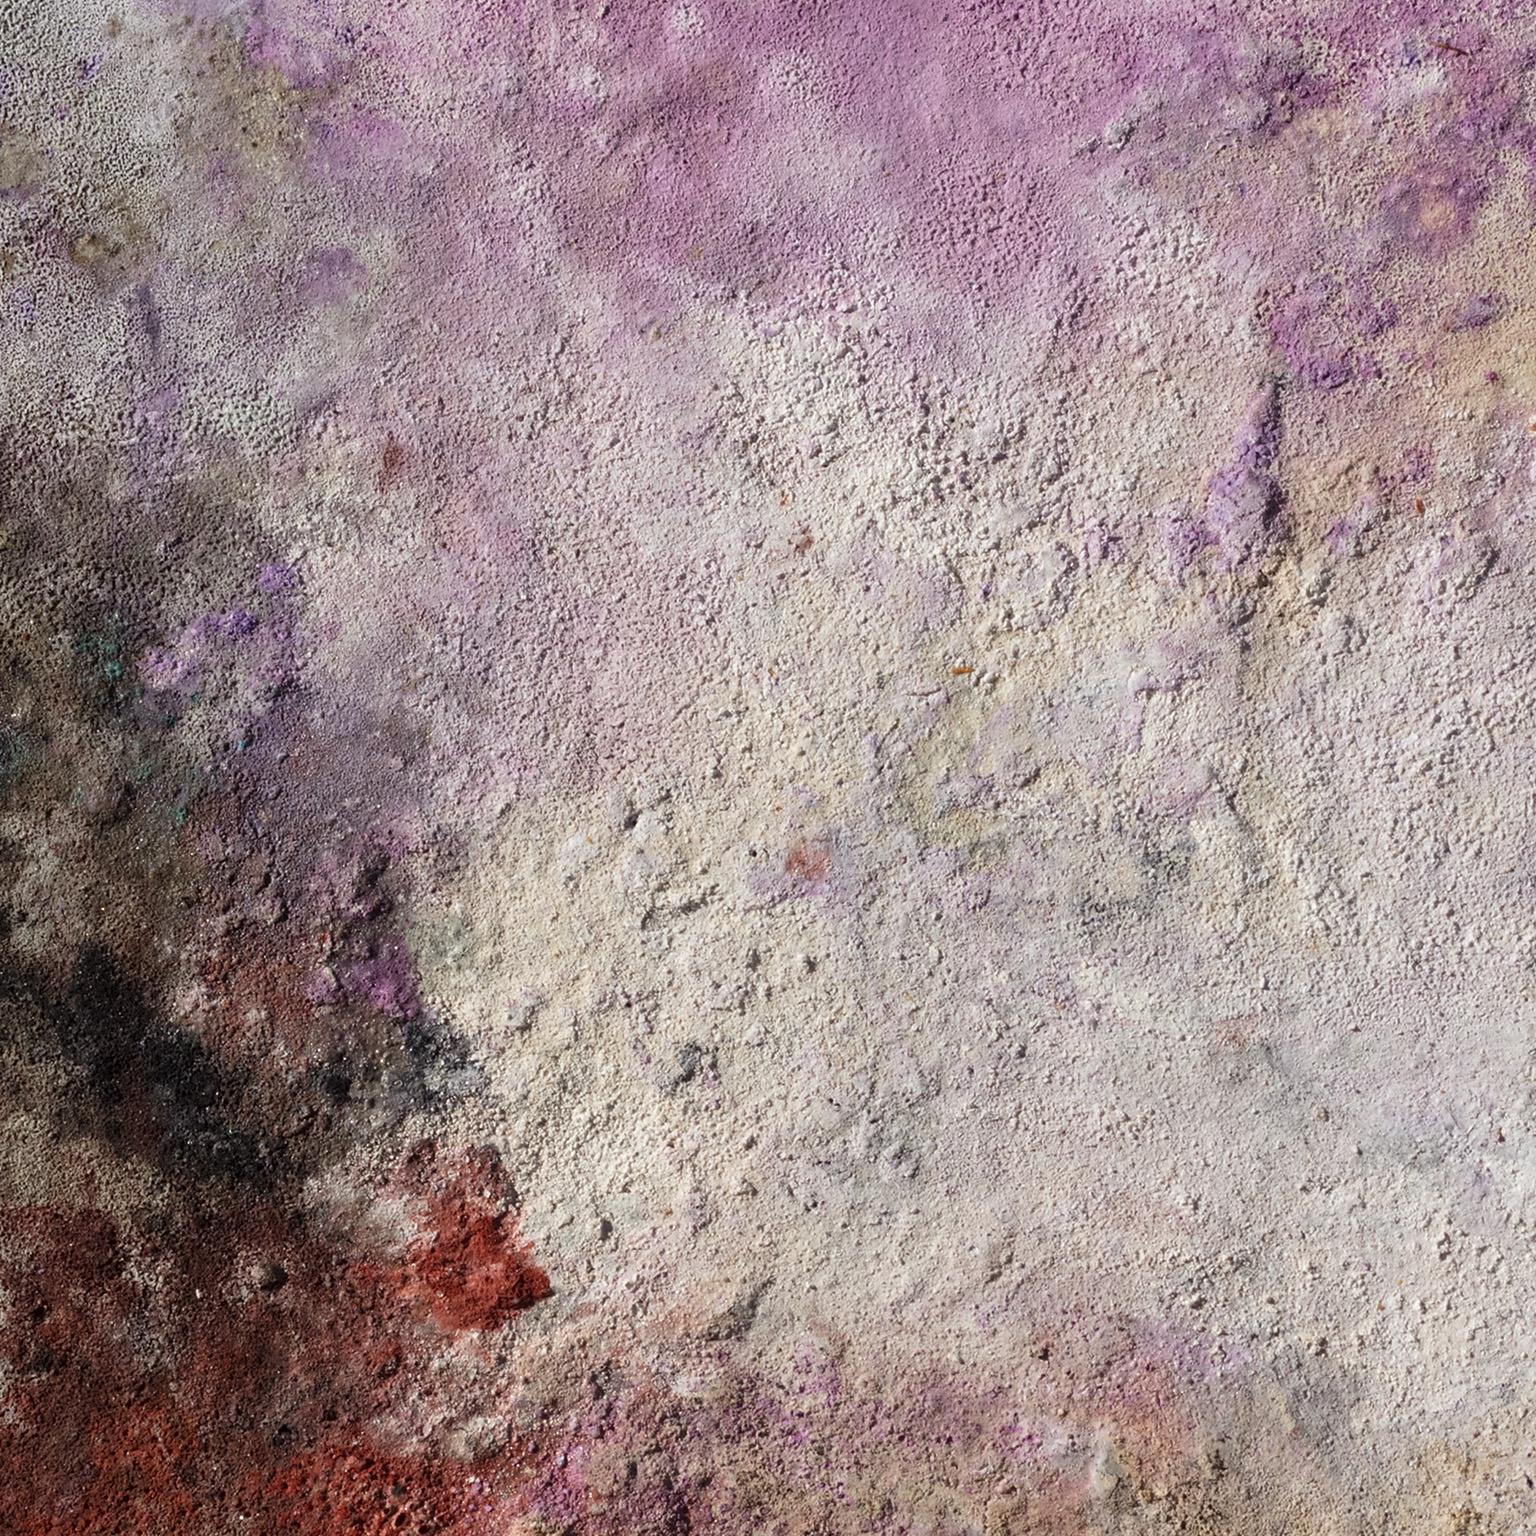 Terra Bruciata (Scorched Earth) - Small Abstract Purple and Red Painting - Contemporary Mixed Media Art by Orazio De Gennaro